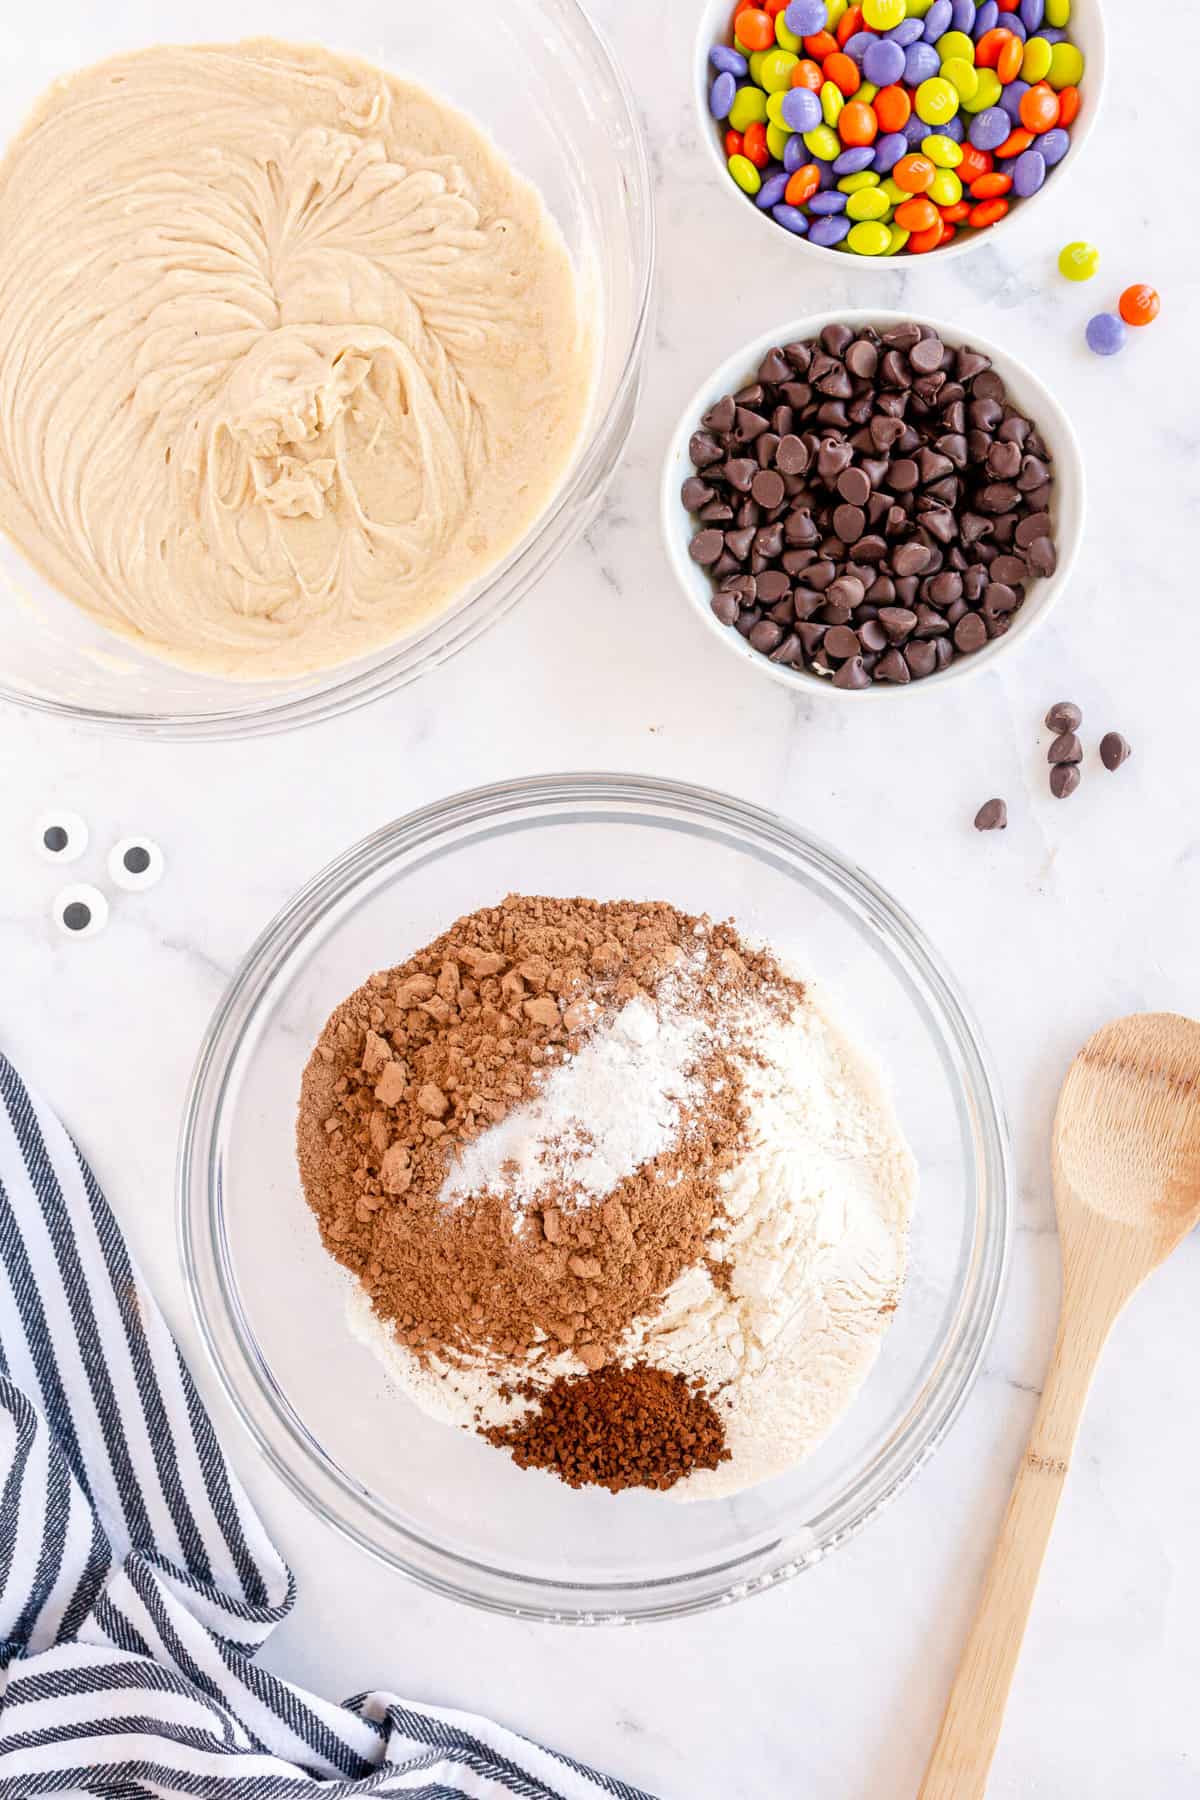 In a Medium Bowl, whisk together Flour, Cocoa Powder, Baking Powder, Salt and Coffee Granules until well blended.